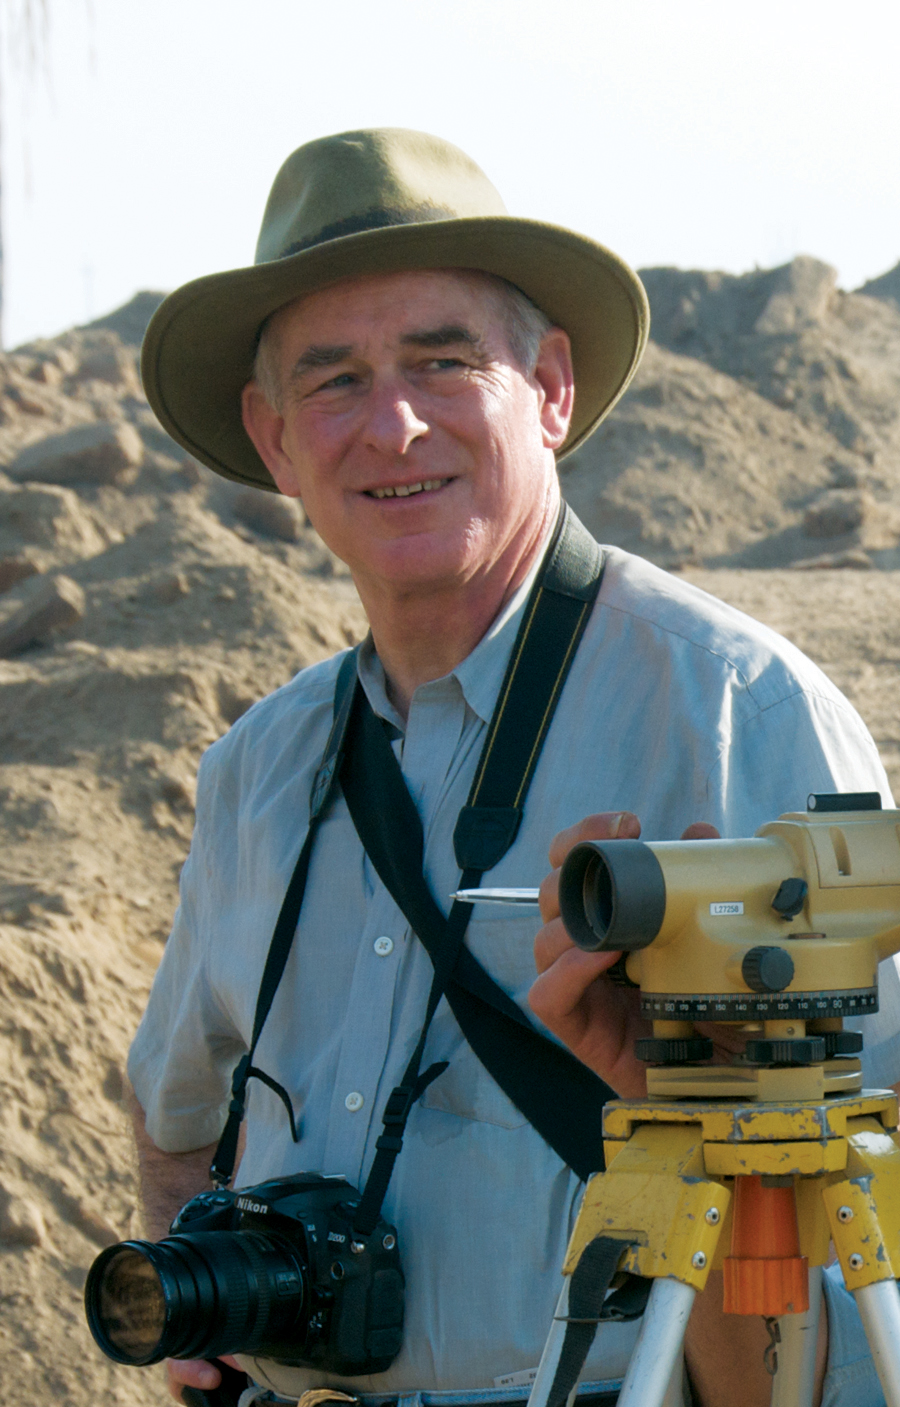 The Forum Presents Archaeologist to Speak on Lost City of the Pyramids